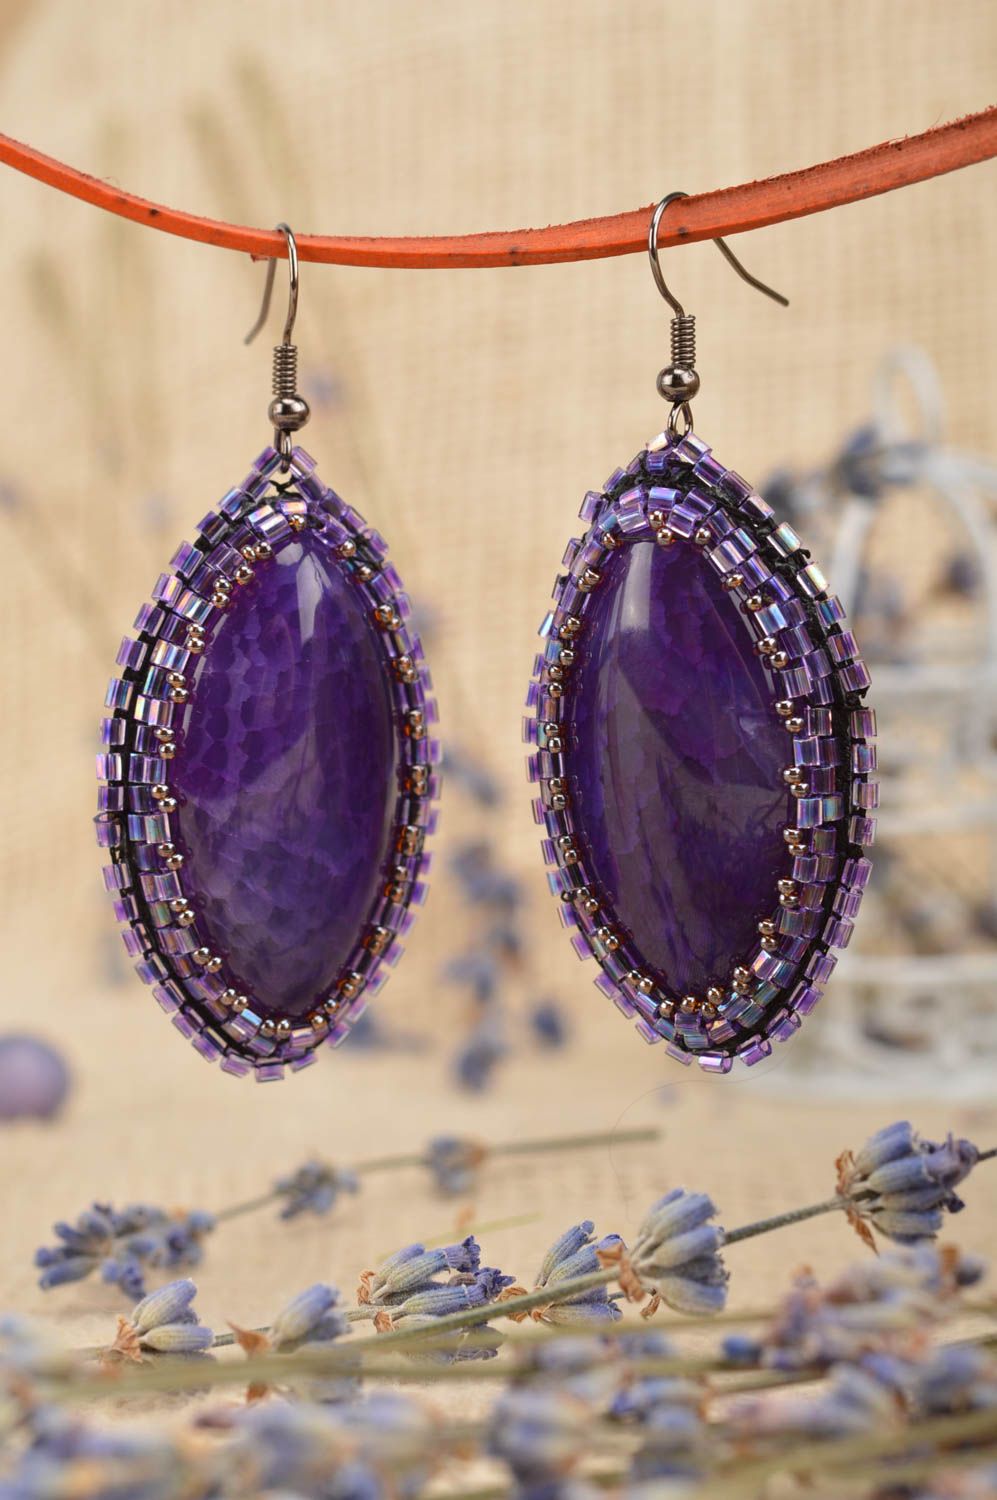 Handmade beaded earrings seed beads fashion accessories for women gifts for her photo 1